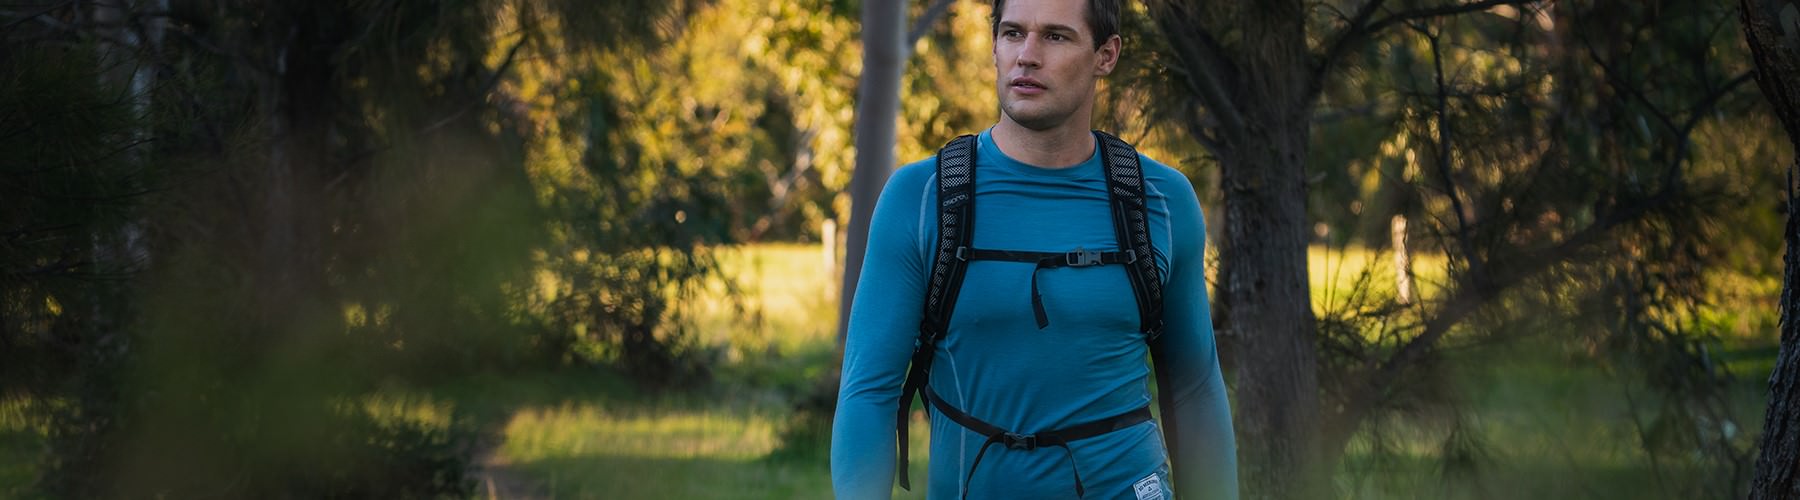 Man hiking outdoors in a blue long sleeve top and wearing a backpack